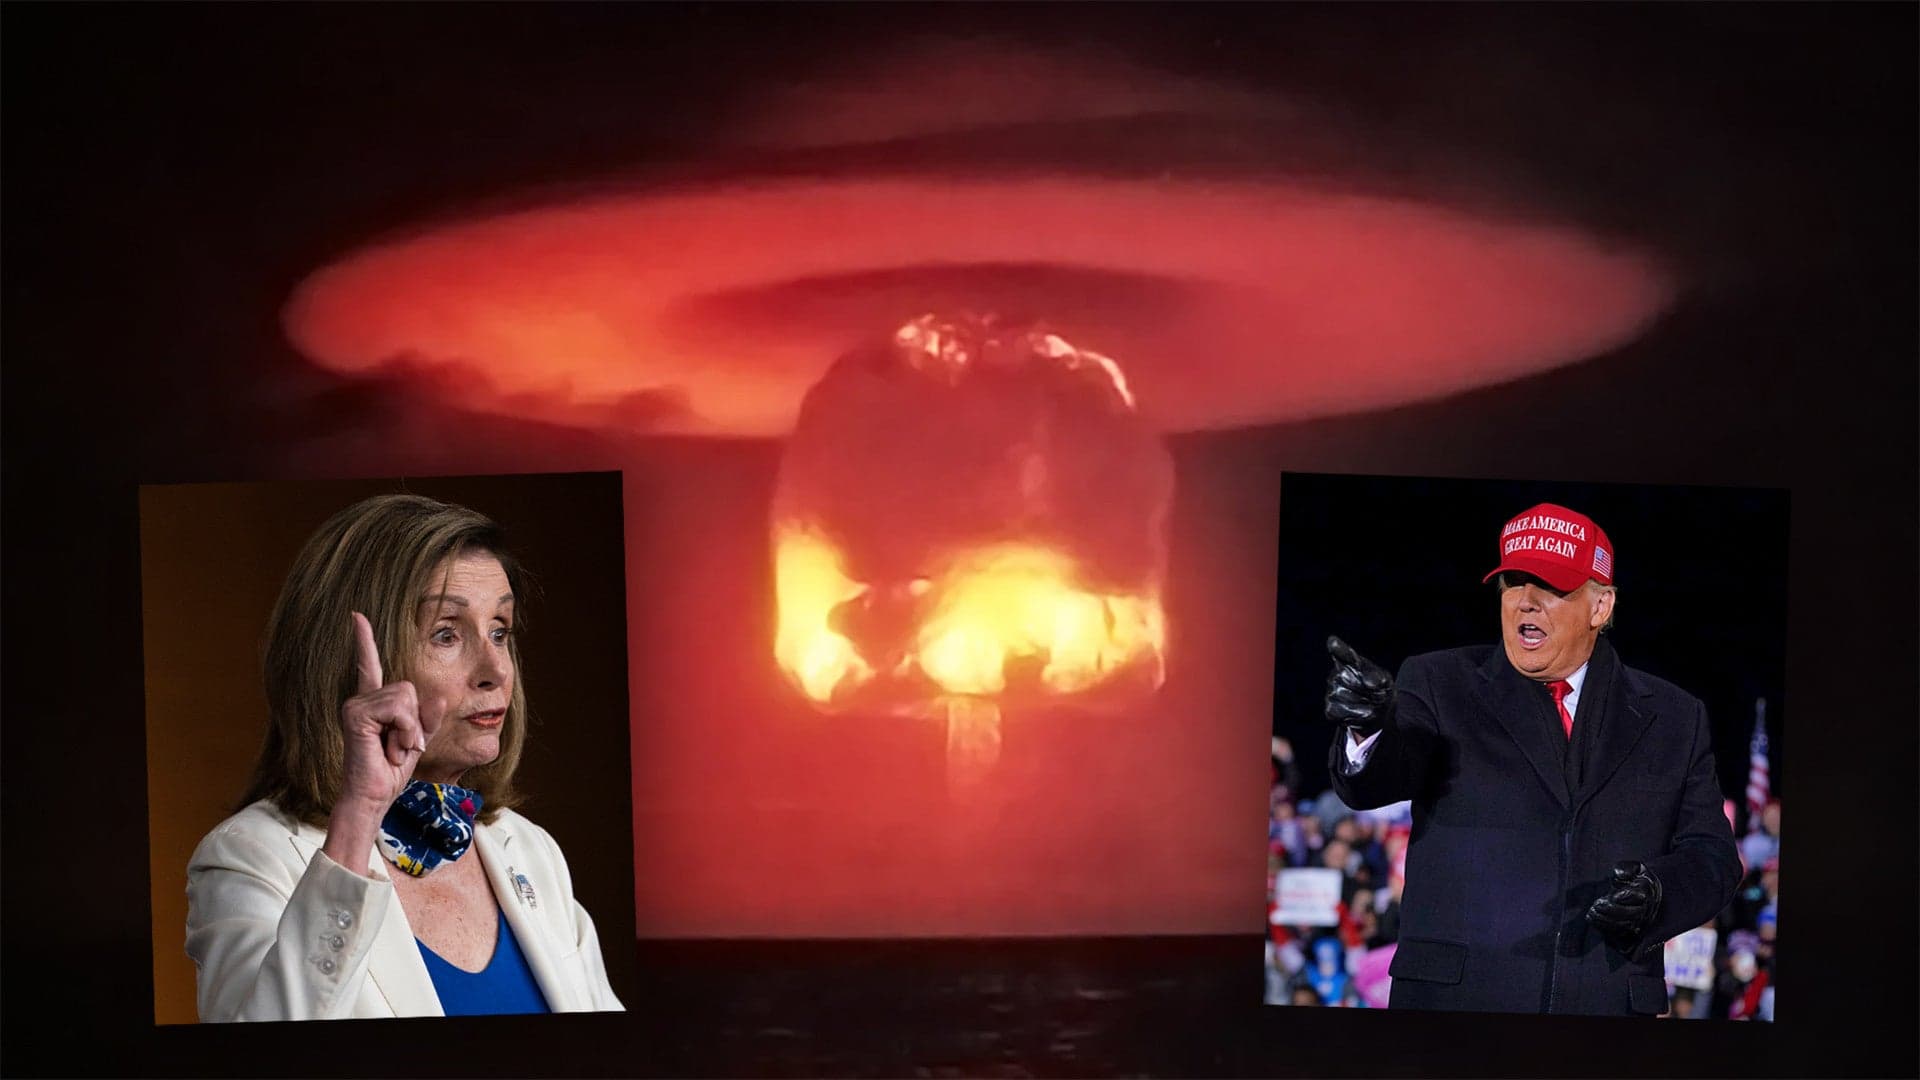 Pelosi Wants To Prevent “Unhinged” Trump From Launching A Nuclear Strike. Here’s The Reality